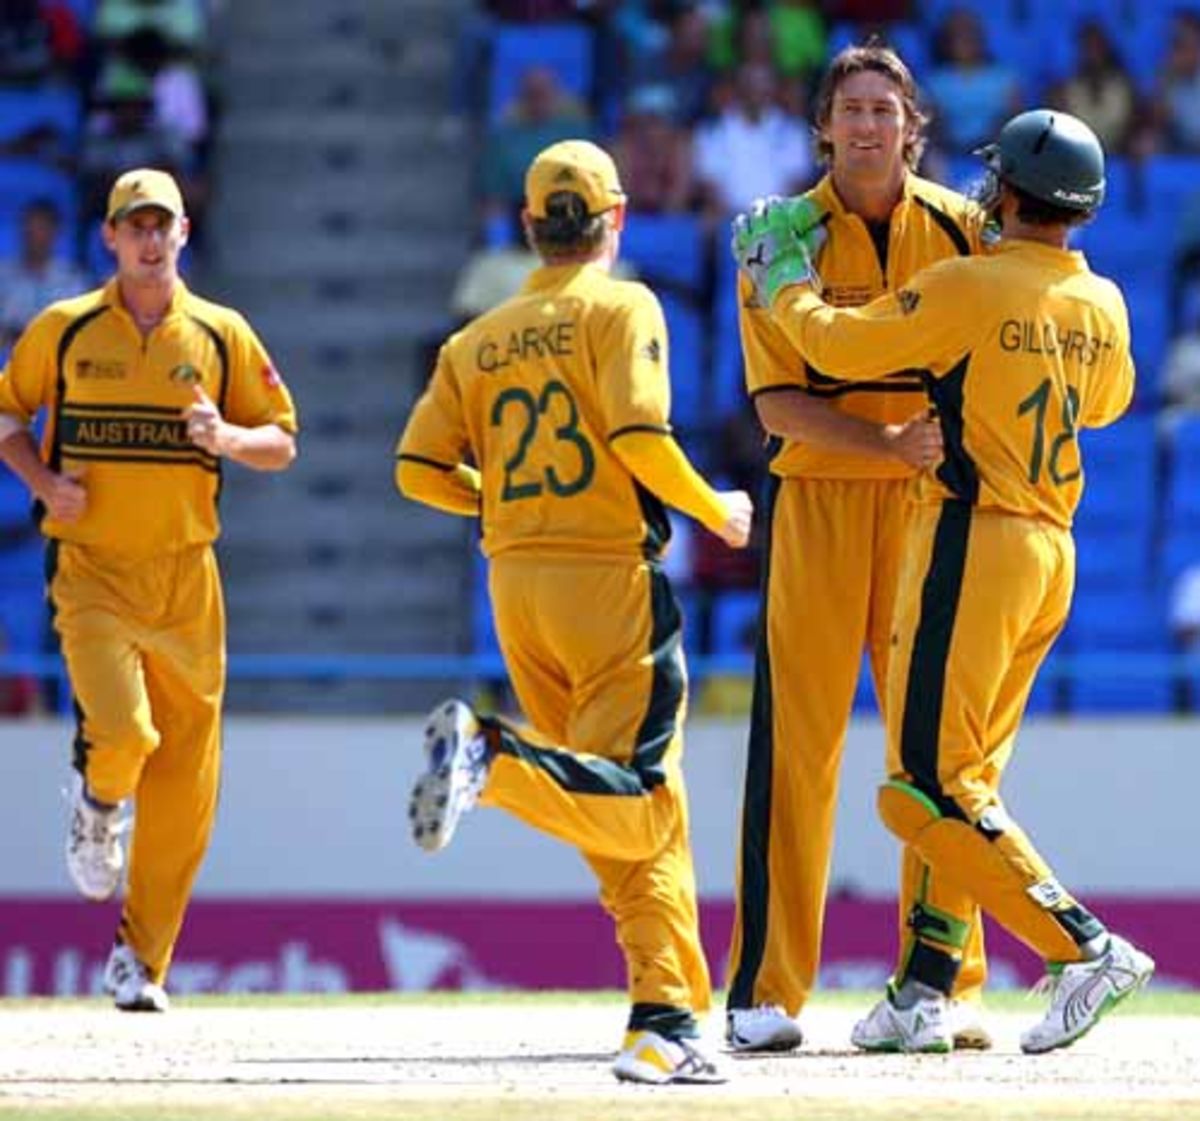 Glenn Mcgrath Is Congratulated By His Teammates On Passing Wasim Akrams World Cup Record Of 54 2527